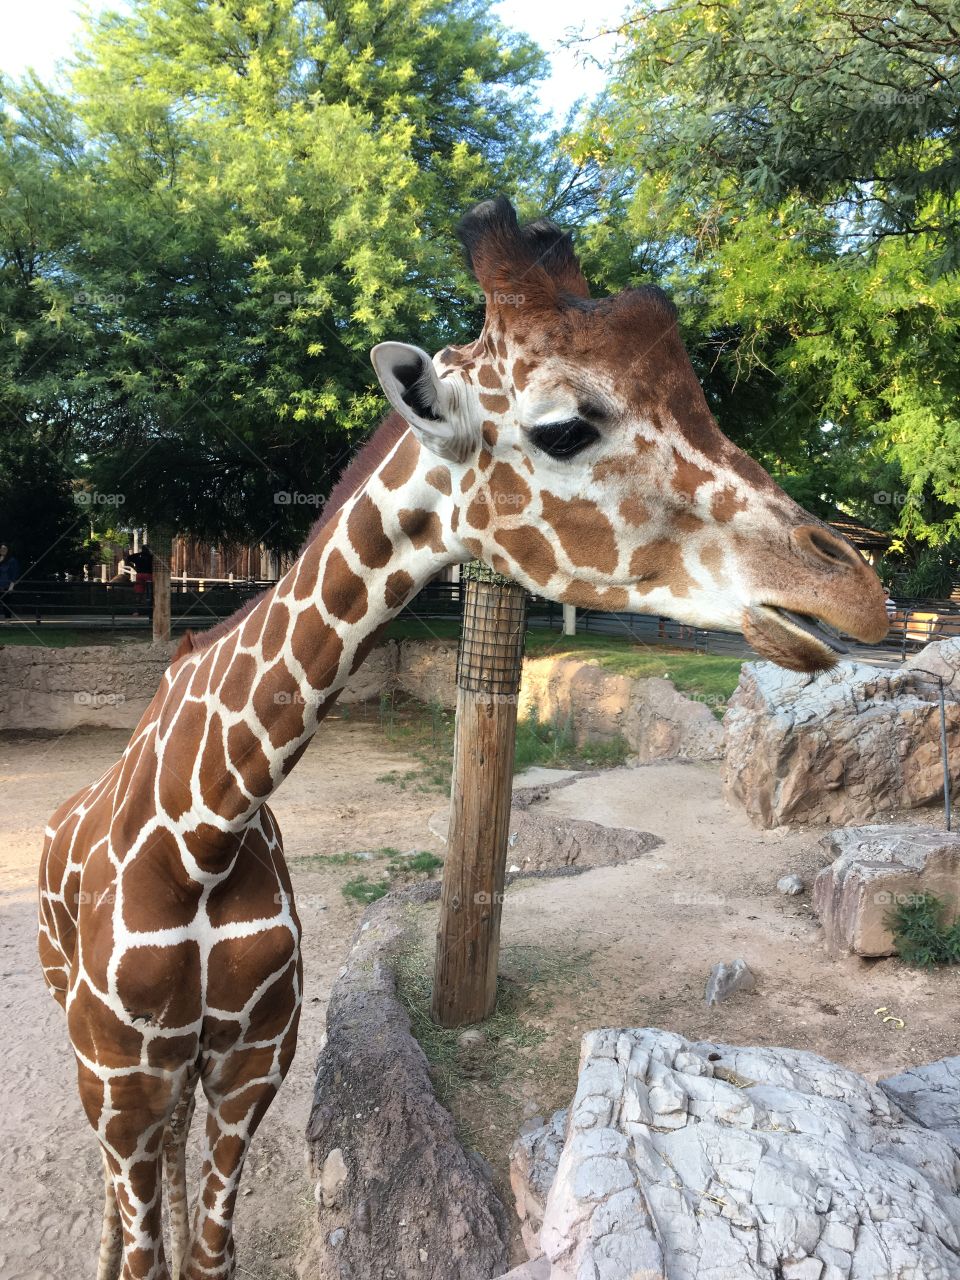 Feeding the giraffes at the Reid Park Zoo in Arizona. Great pattern on the animal, looked very peaceful amongst the green trees in the background. 